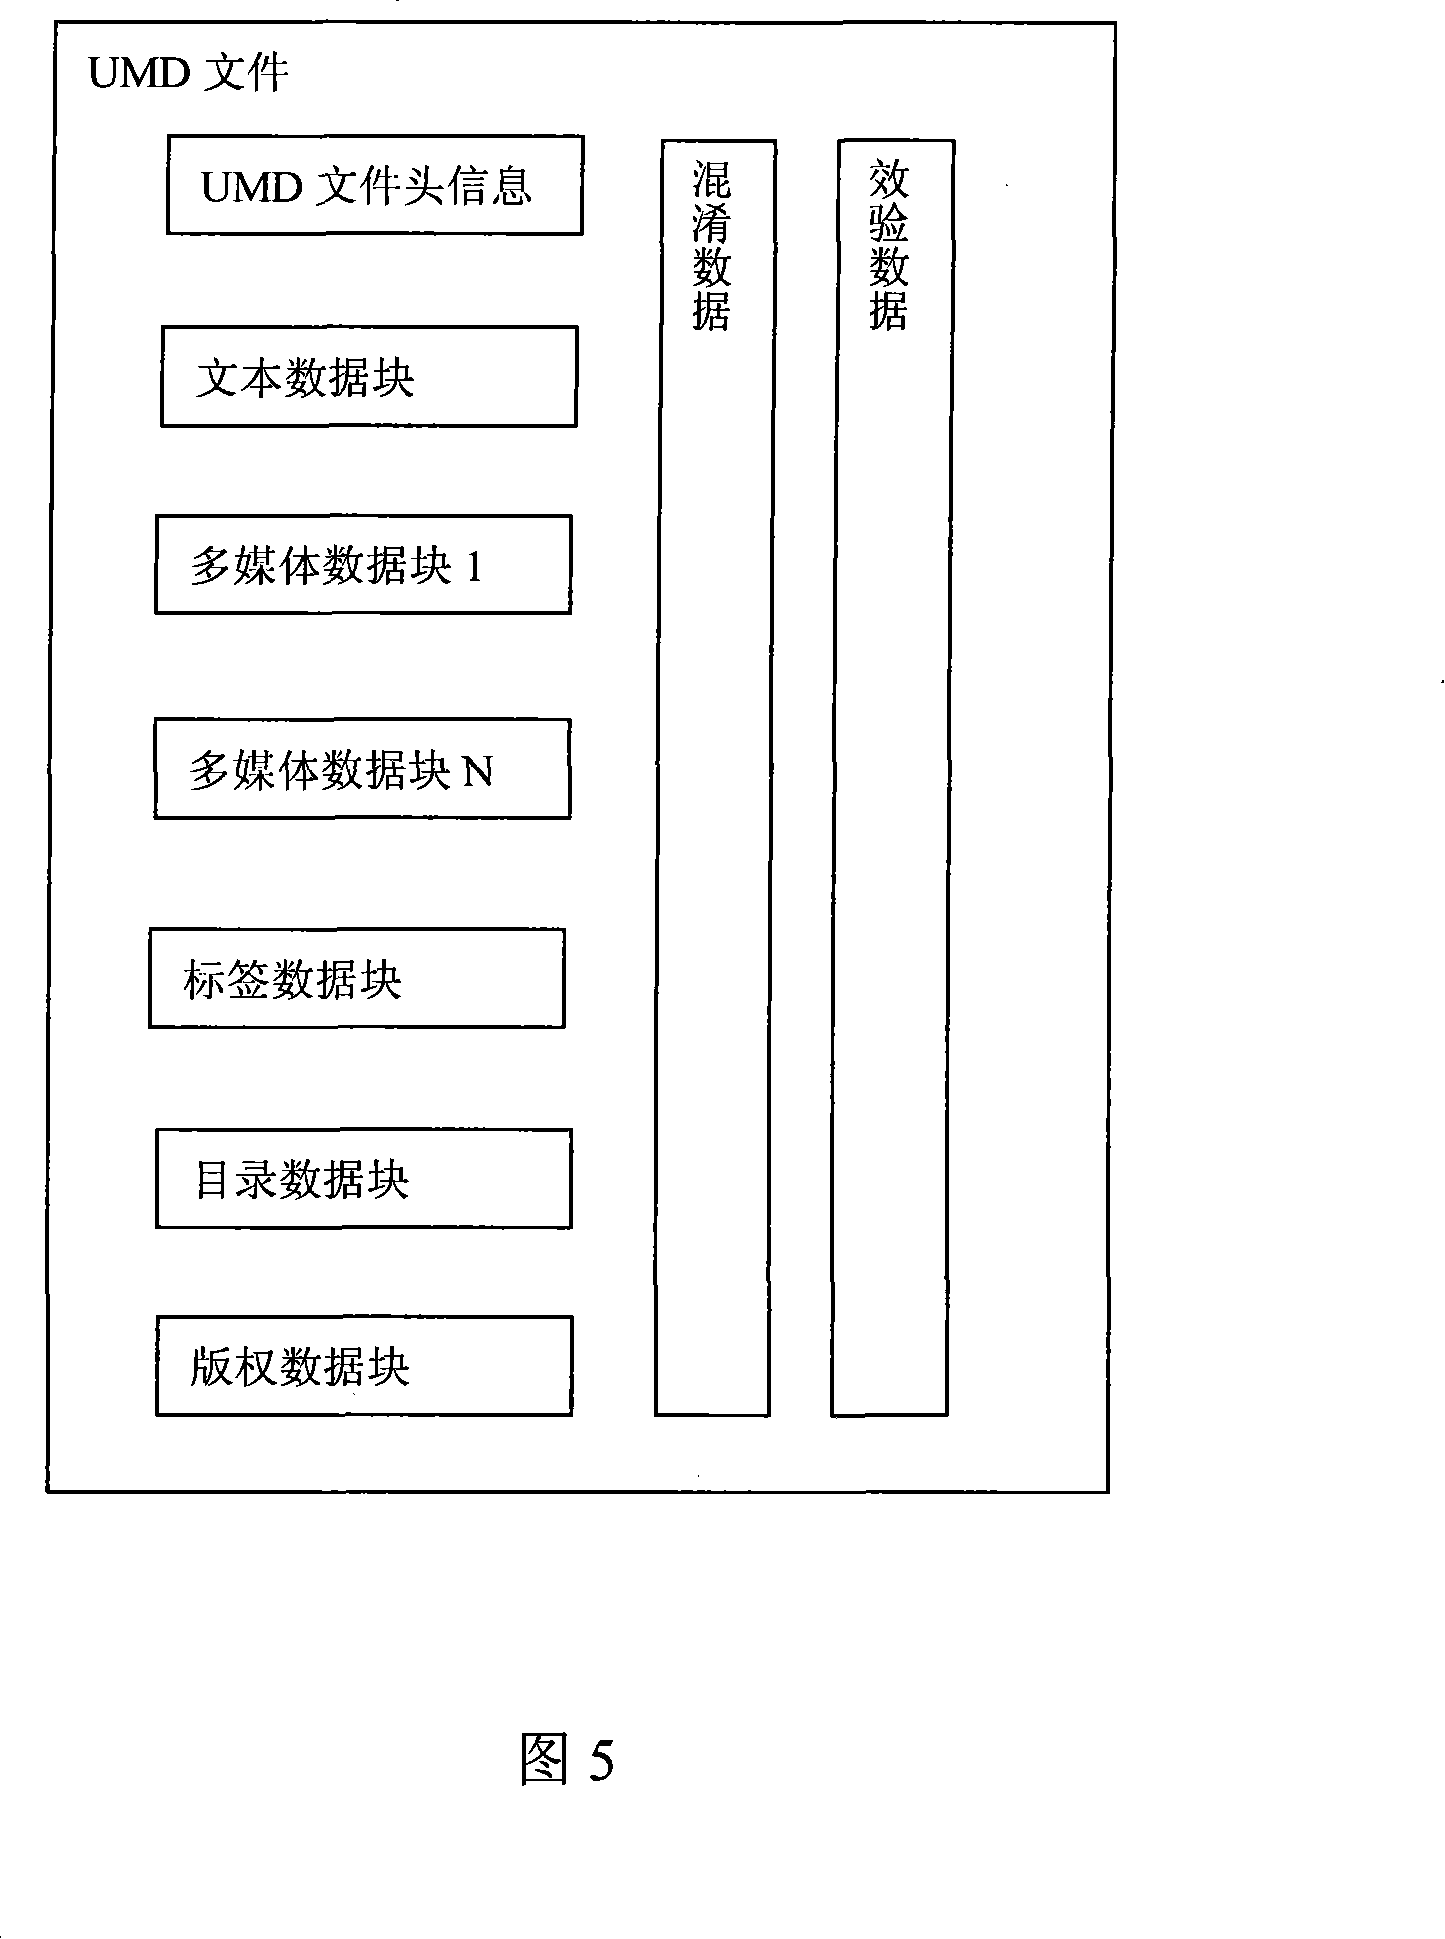 Mobile terminal apparatus electronic file memory structure and management techniques